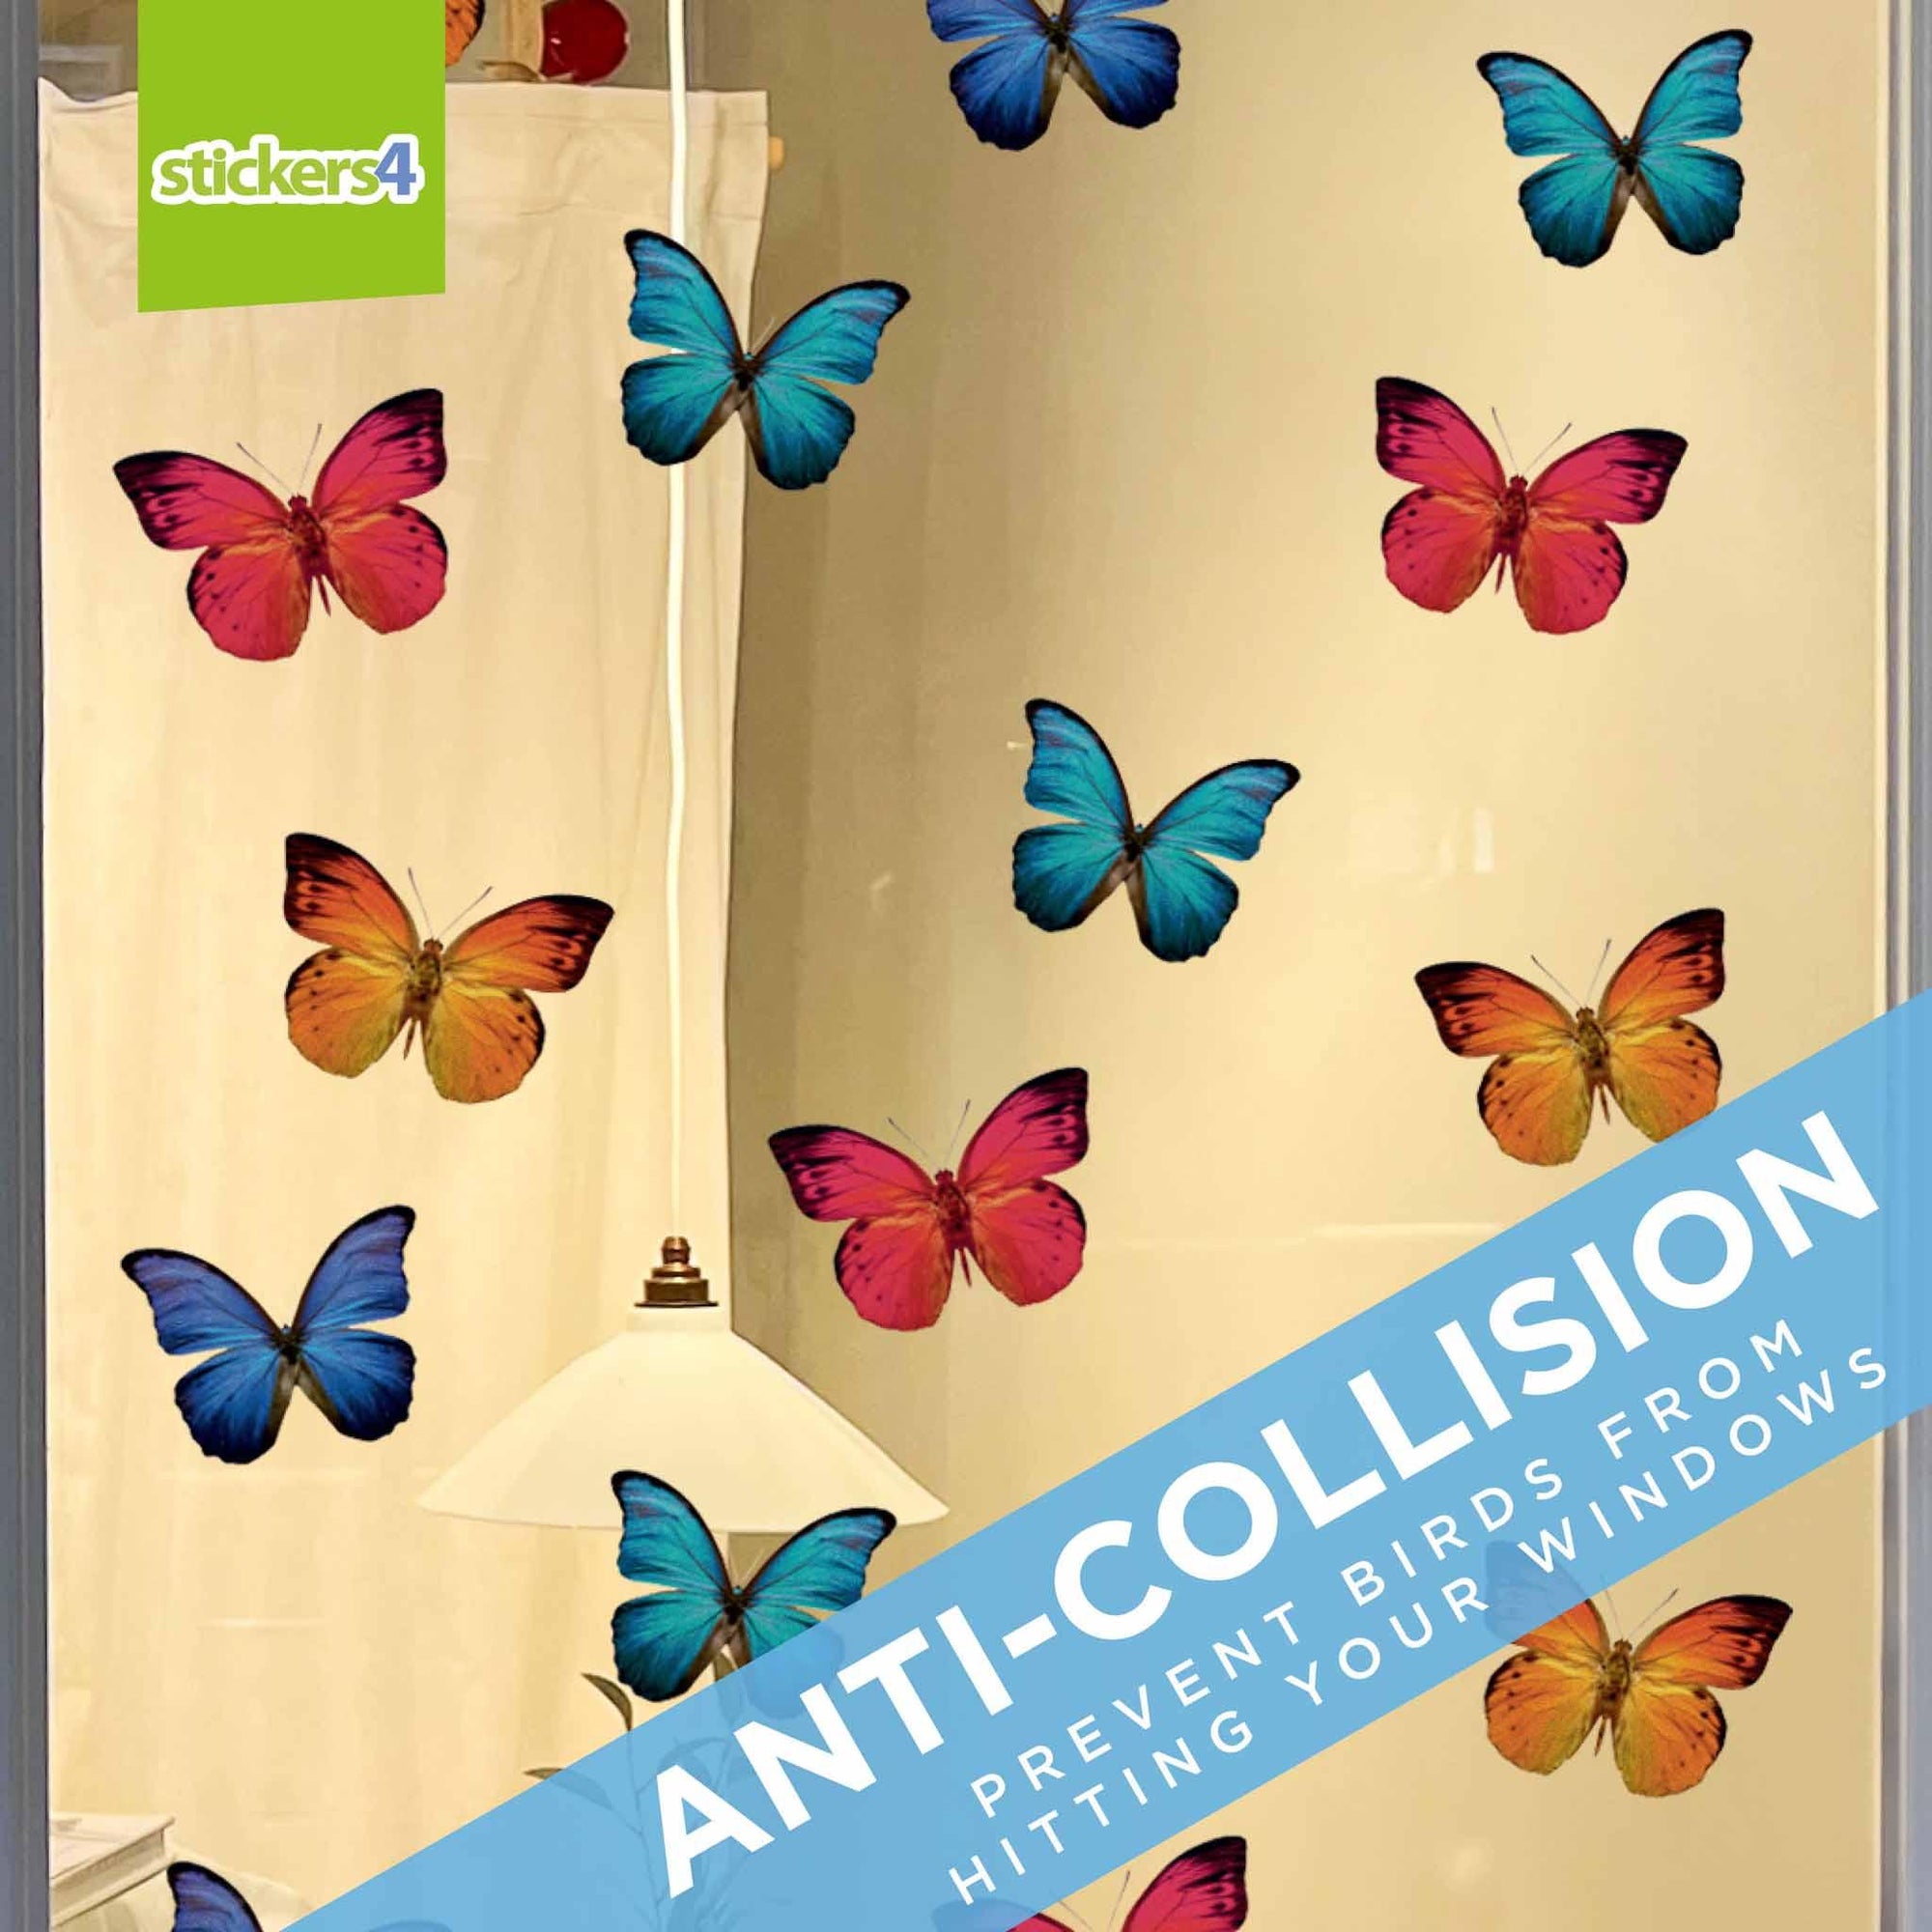 16 Large Colourful Butterfly Static Cling Window Stickers Decorative Bird Strike Prevention